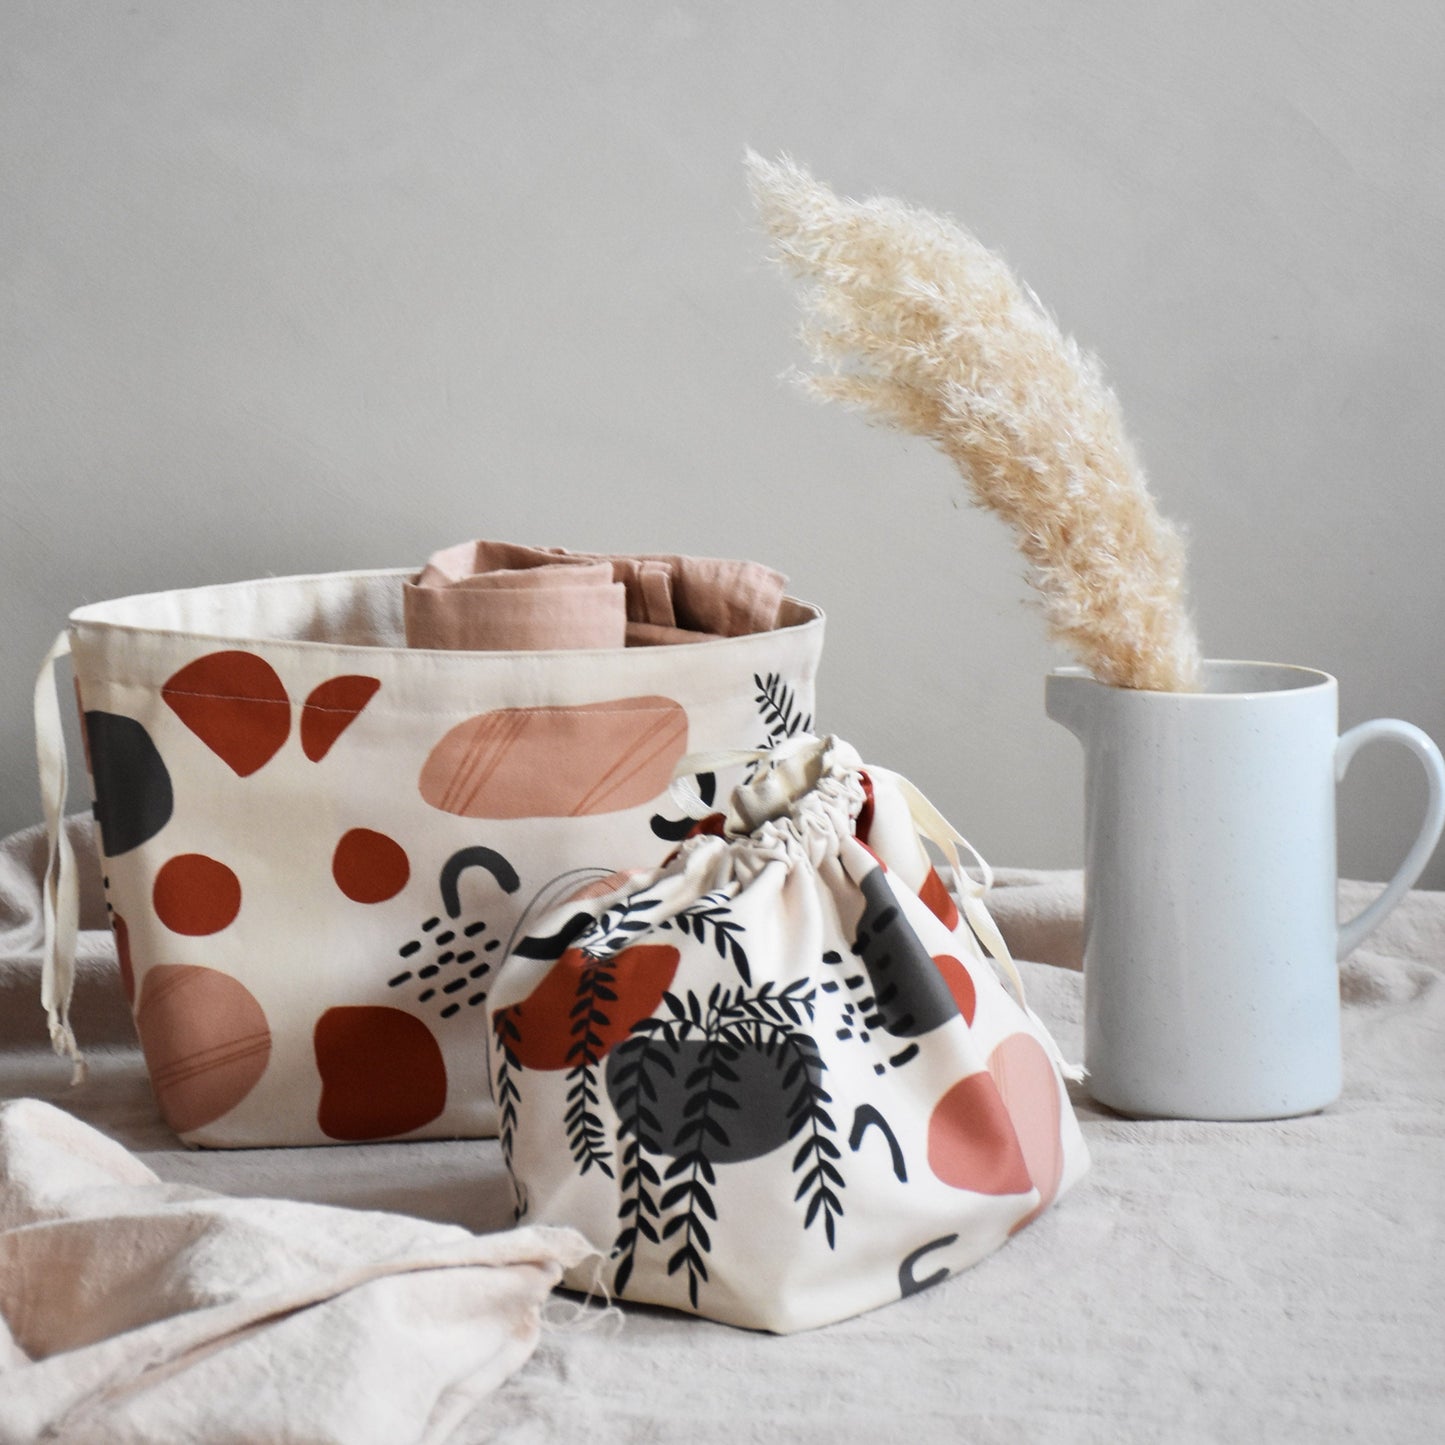 Canvas storage basket - Abstract shapes with nature motif